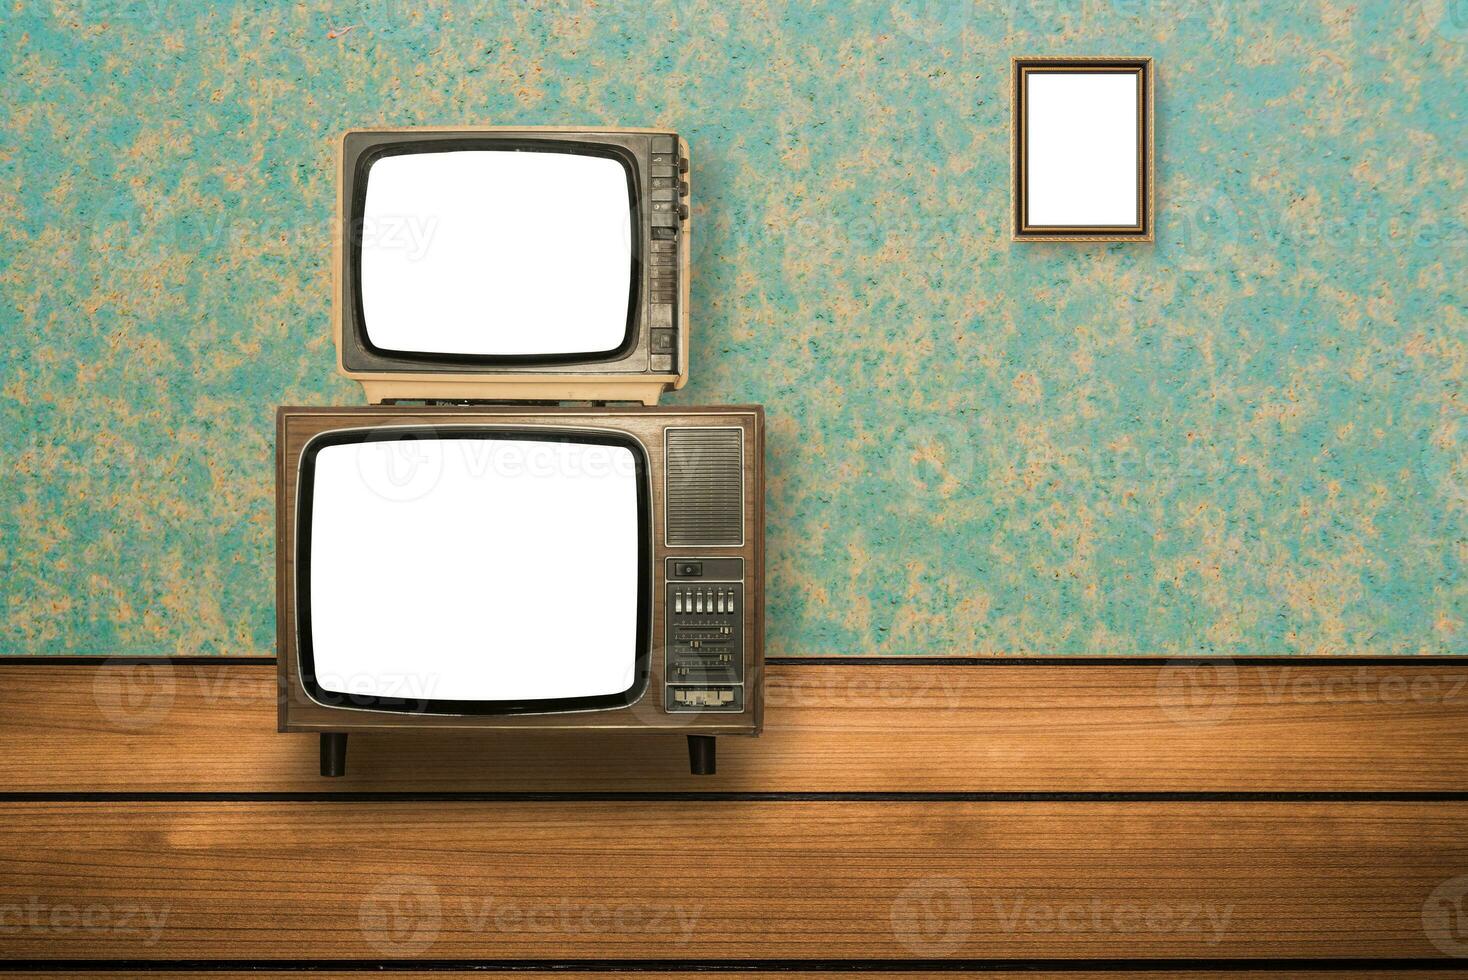 Old Television on wooden floor and photo frames on wall